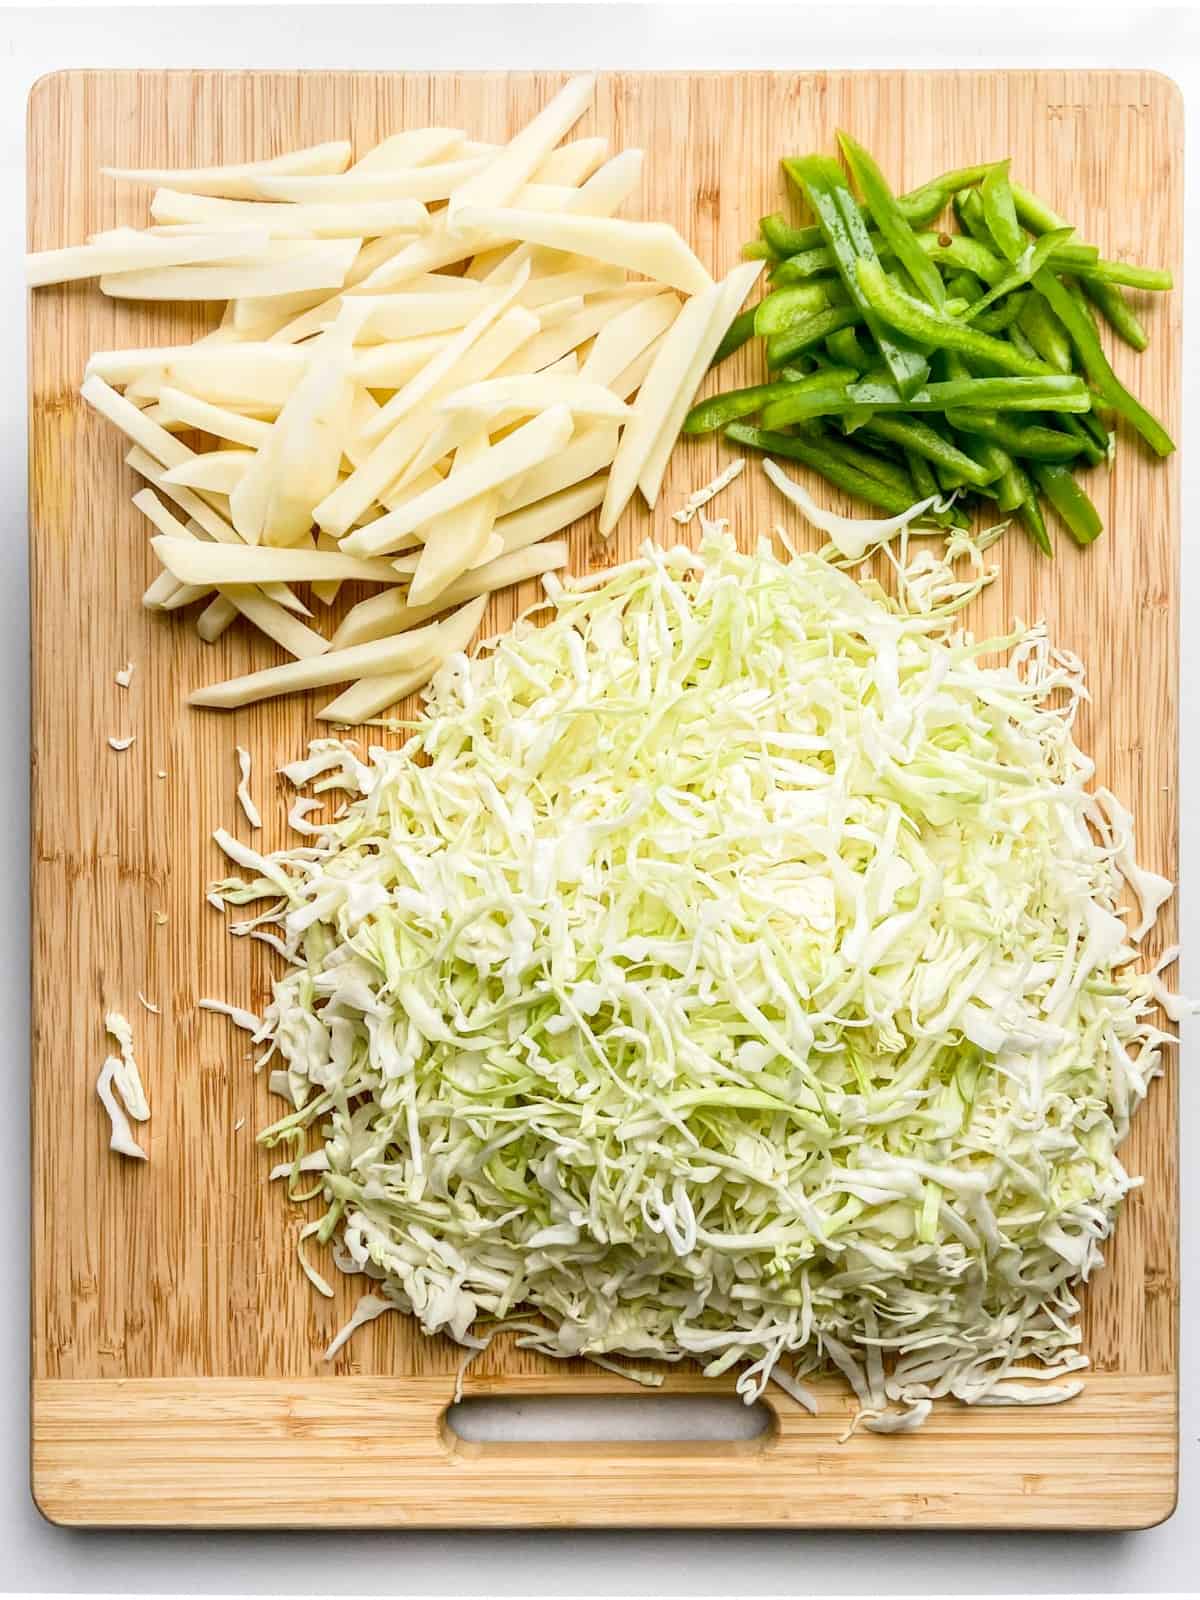 Thinly sliced and julienne vegetables for stir fry recipe